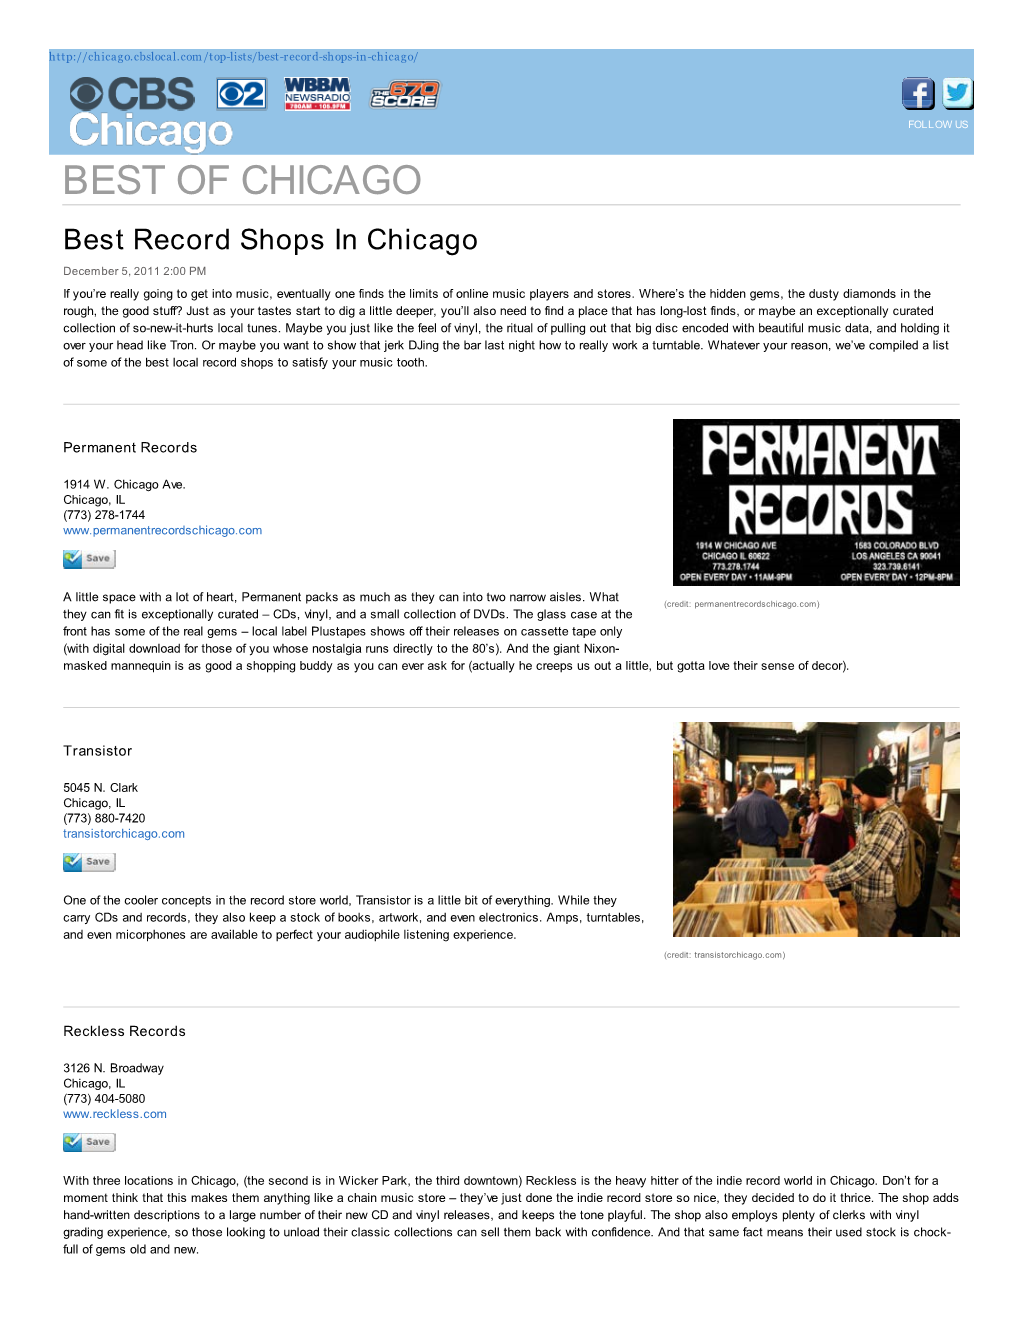 Best Record Shops in Chicago December 5, 2011 2:00 PM If You’Re Really Going to Get Into Music, Eventually One Finds the Limits of Online Music Players and Stores